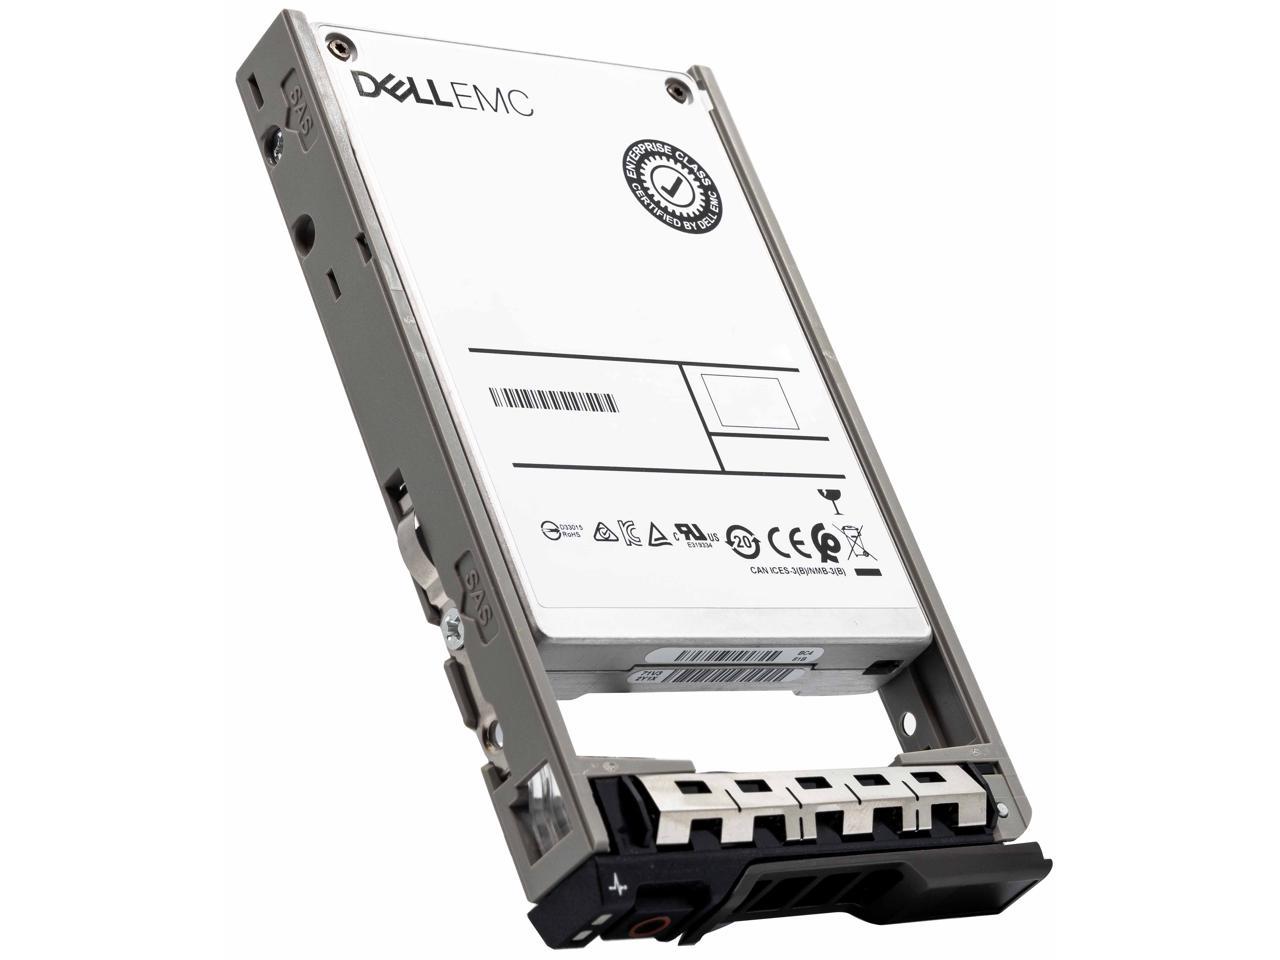 Dell G13 400-AGHK 800GB SAS 12Gb/s 2.5" Manufacturer Recertified SSD